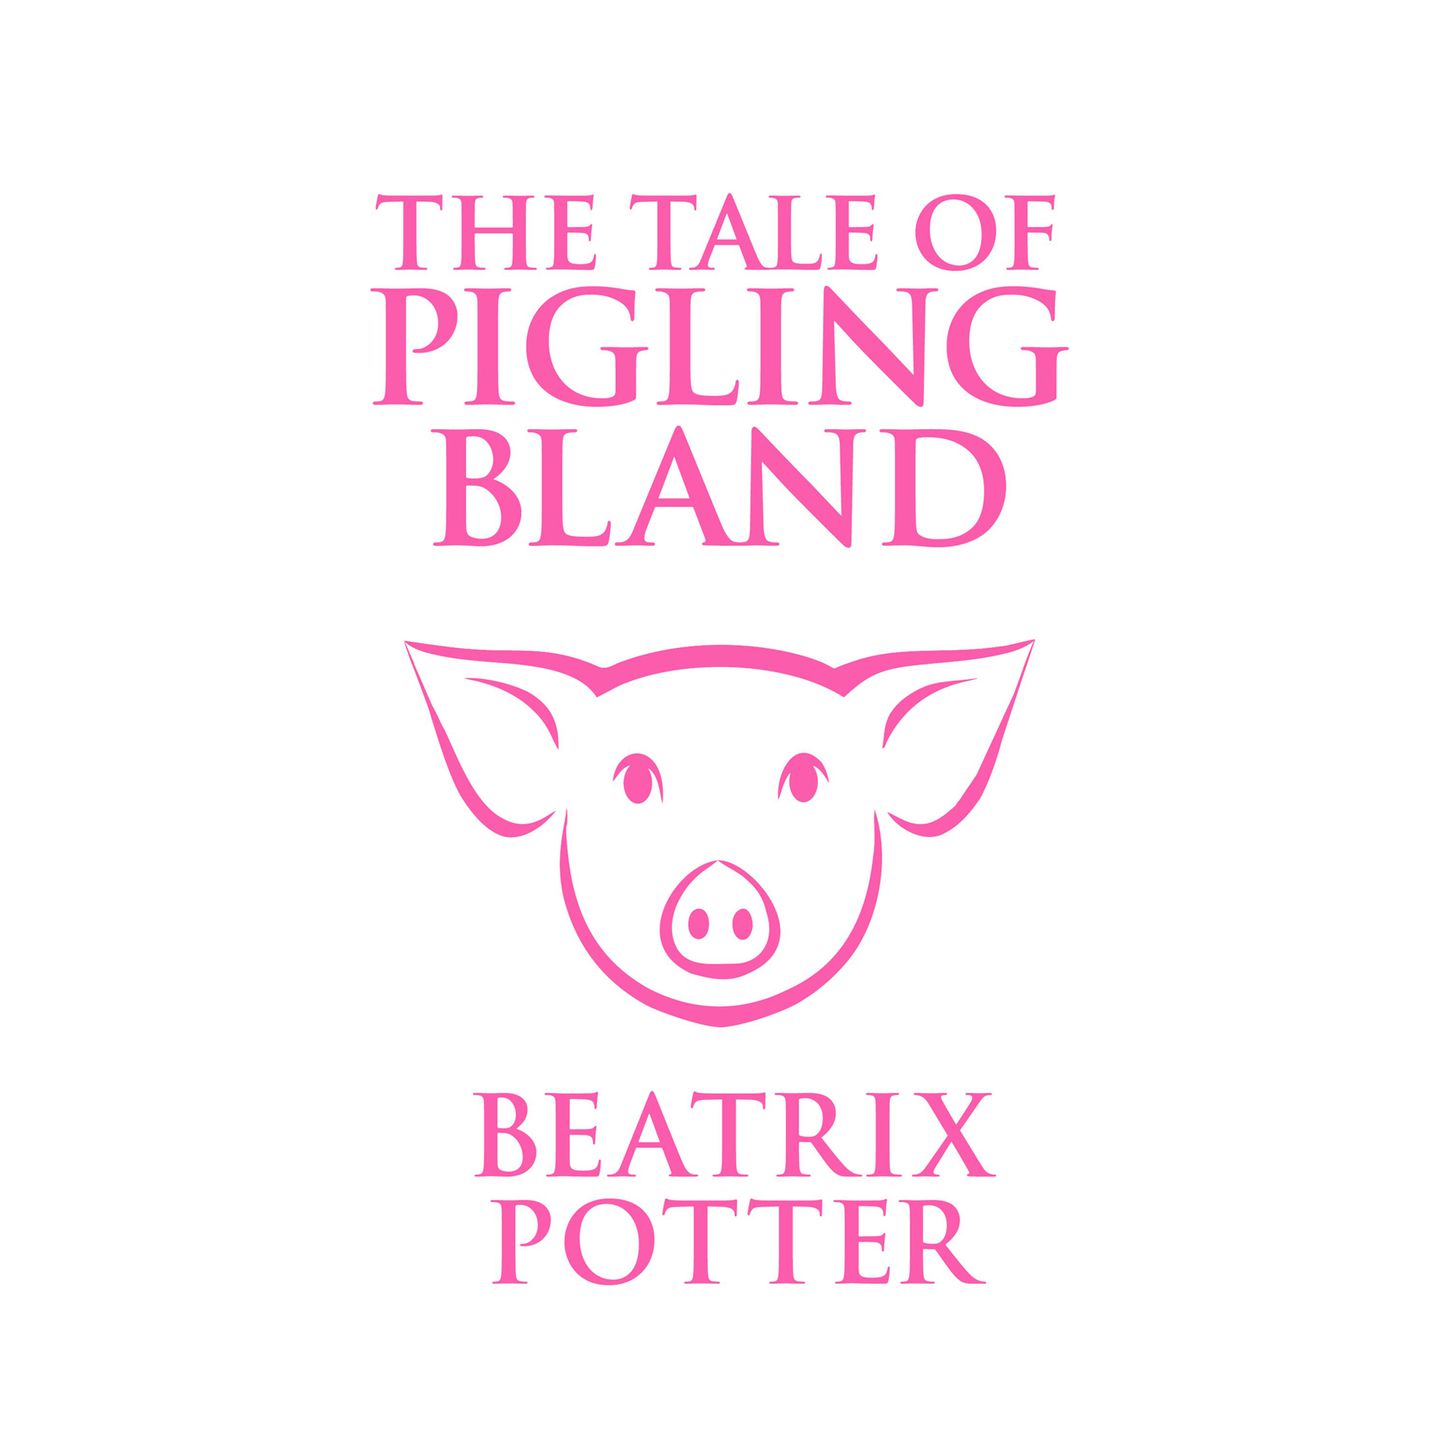 The Tale of Pigling Bland (Unabridged)